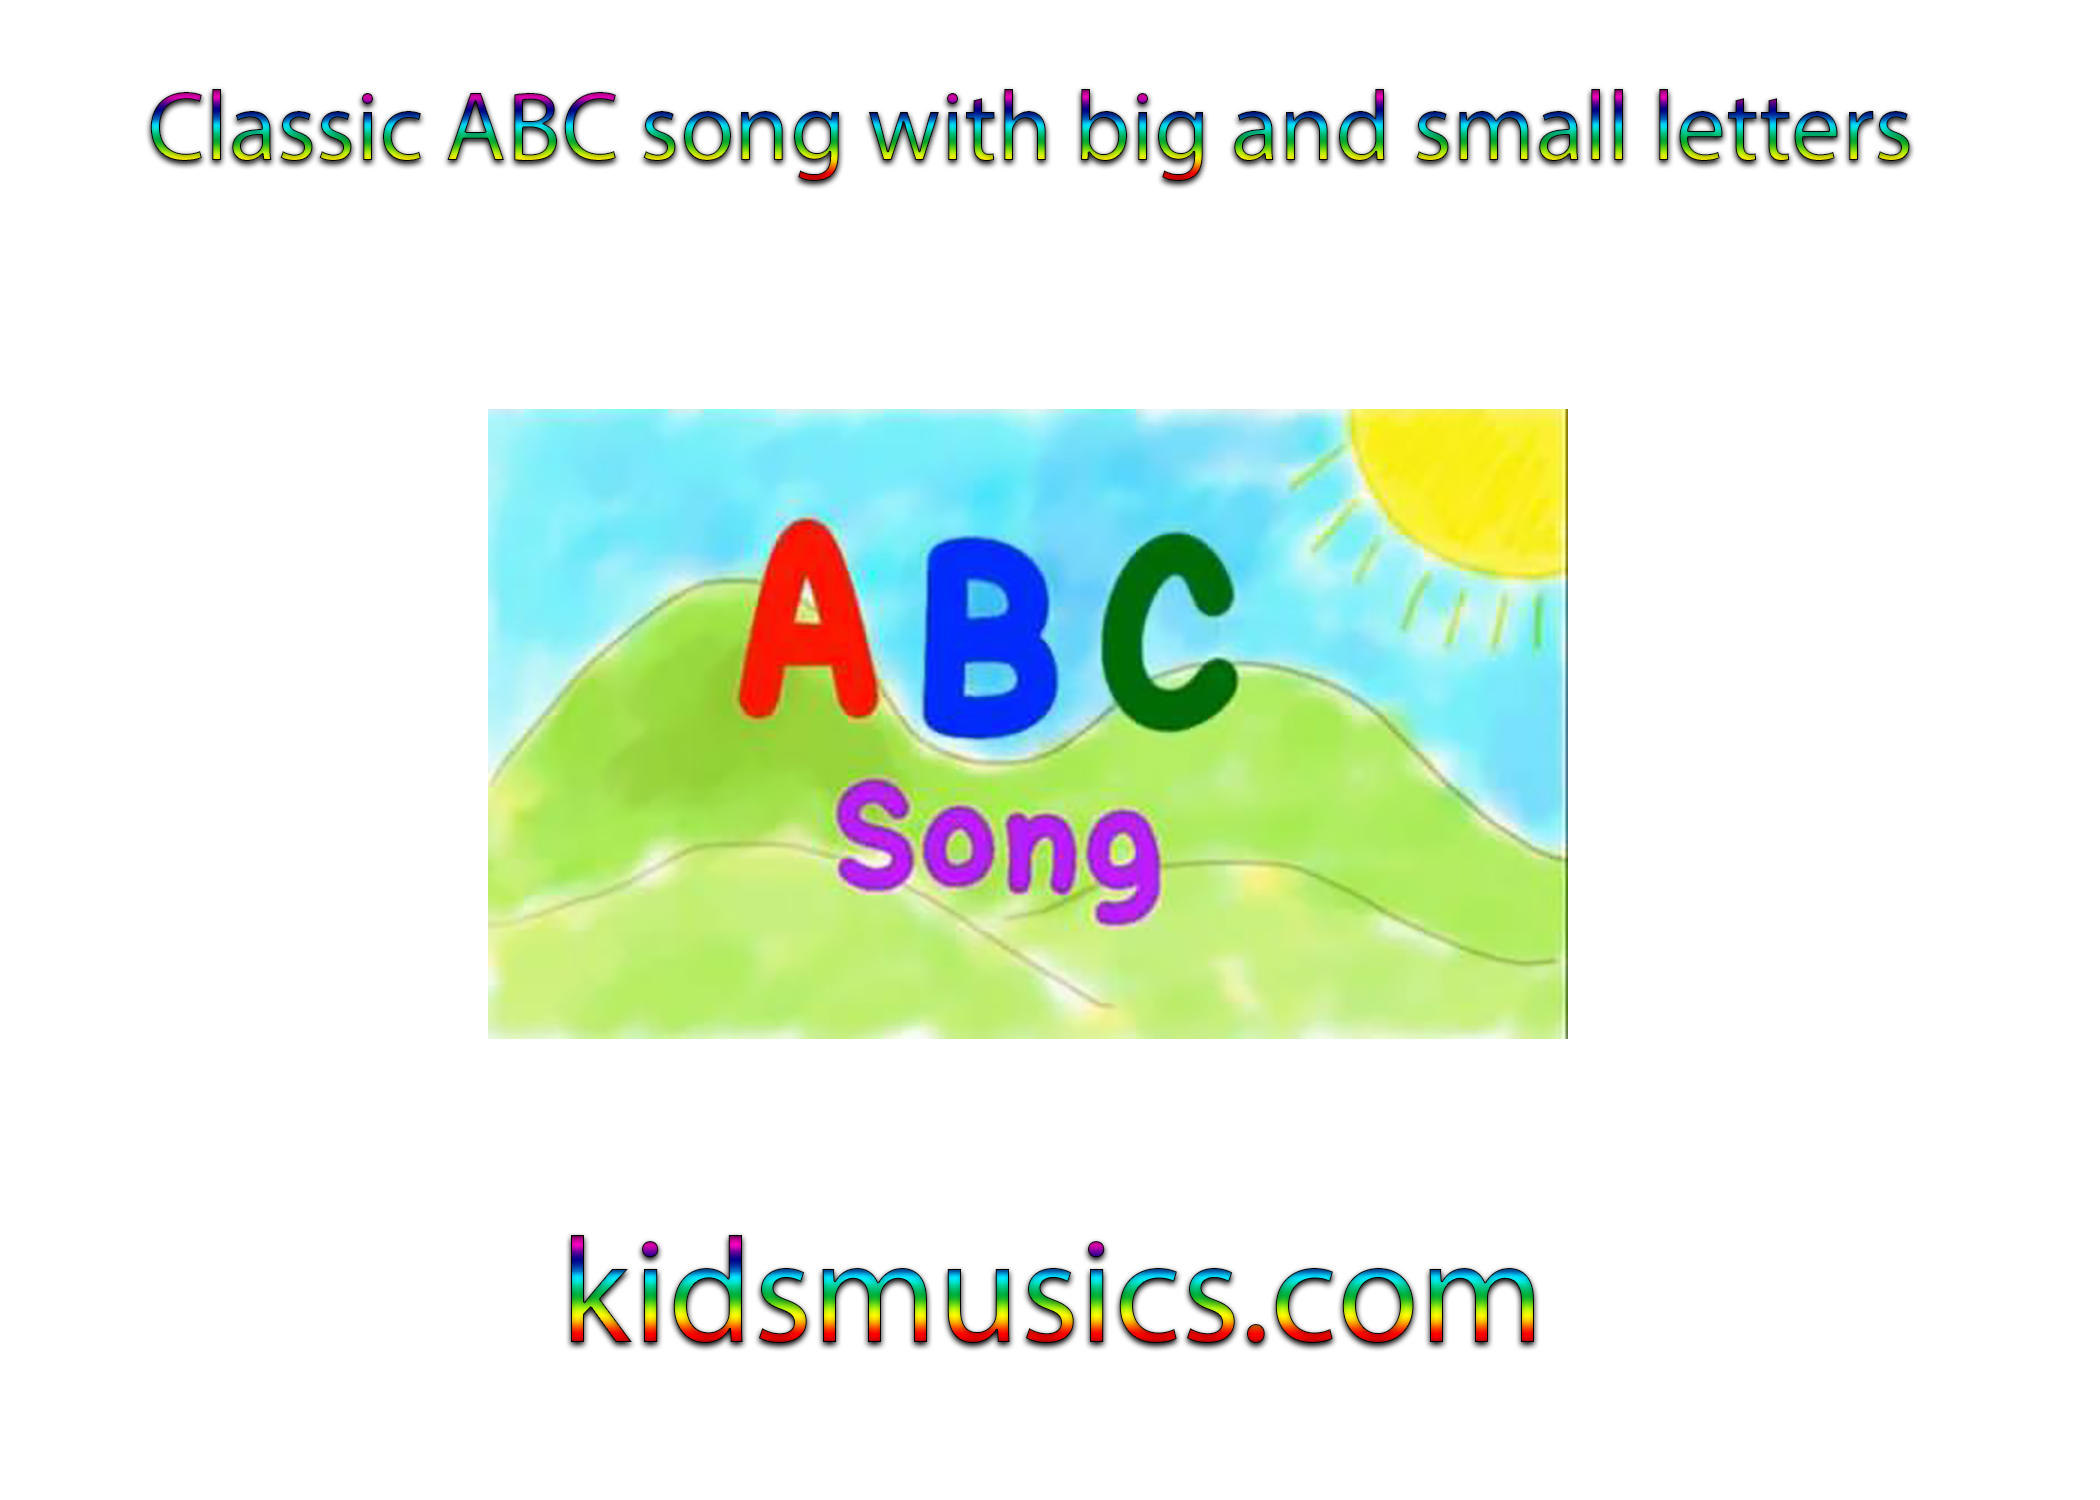 Classic ABC song with big and small letters